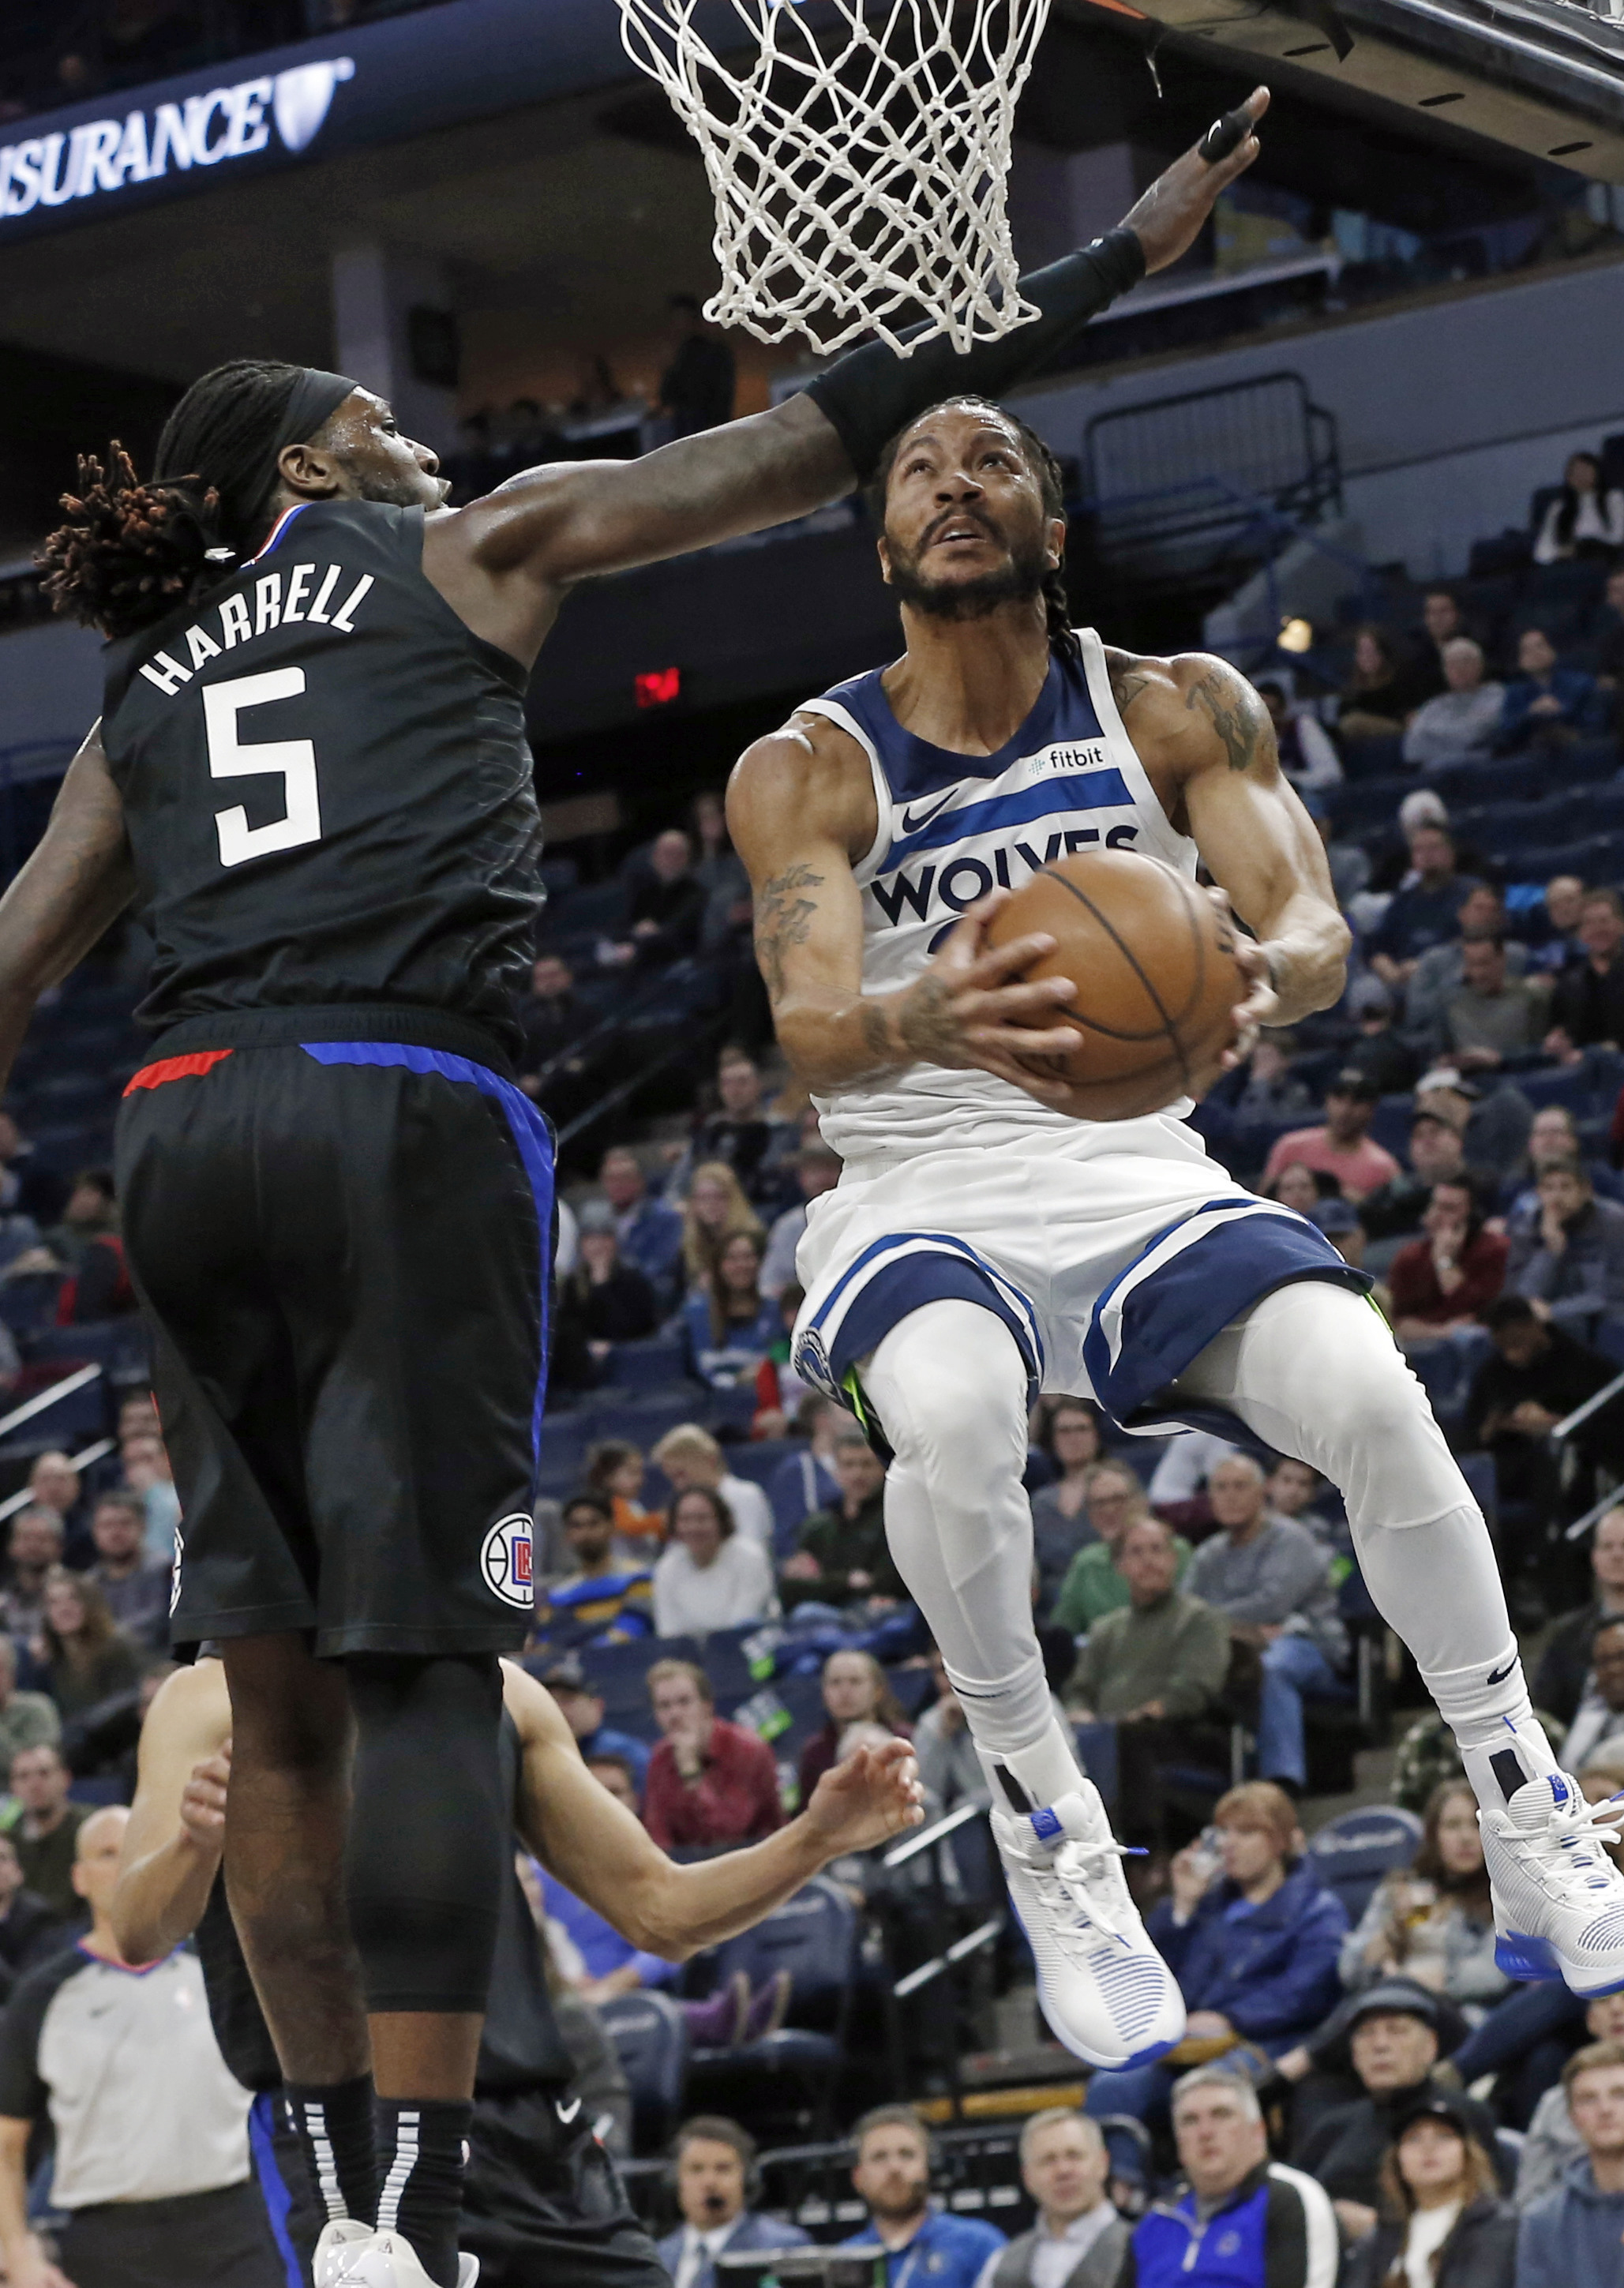 Healthy Rose, Teague lead Timberwolves past Clippers 130-120